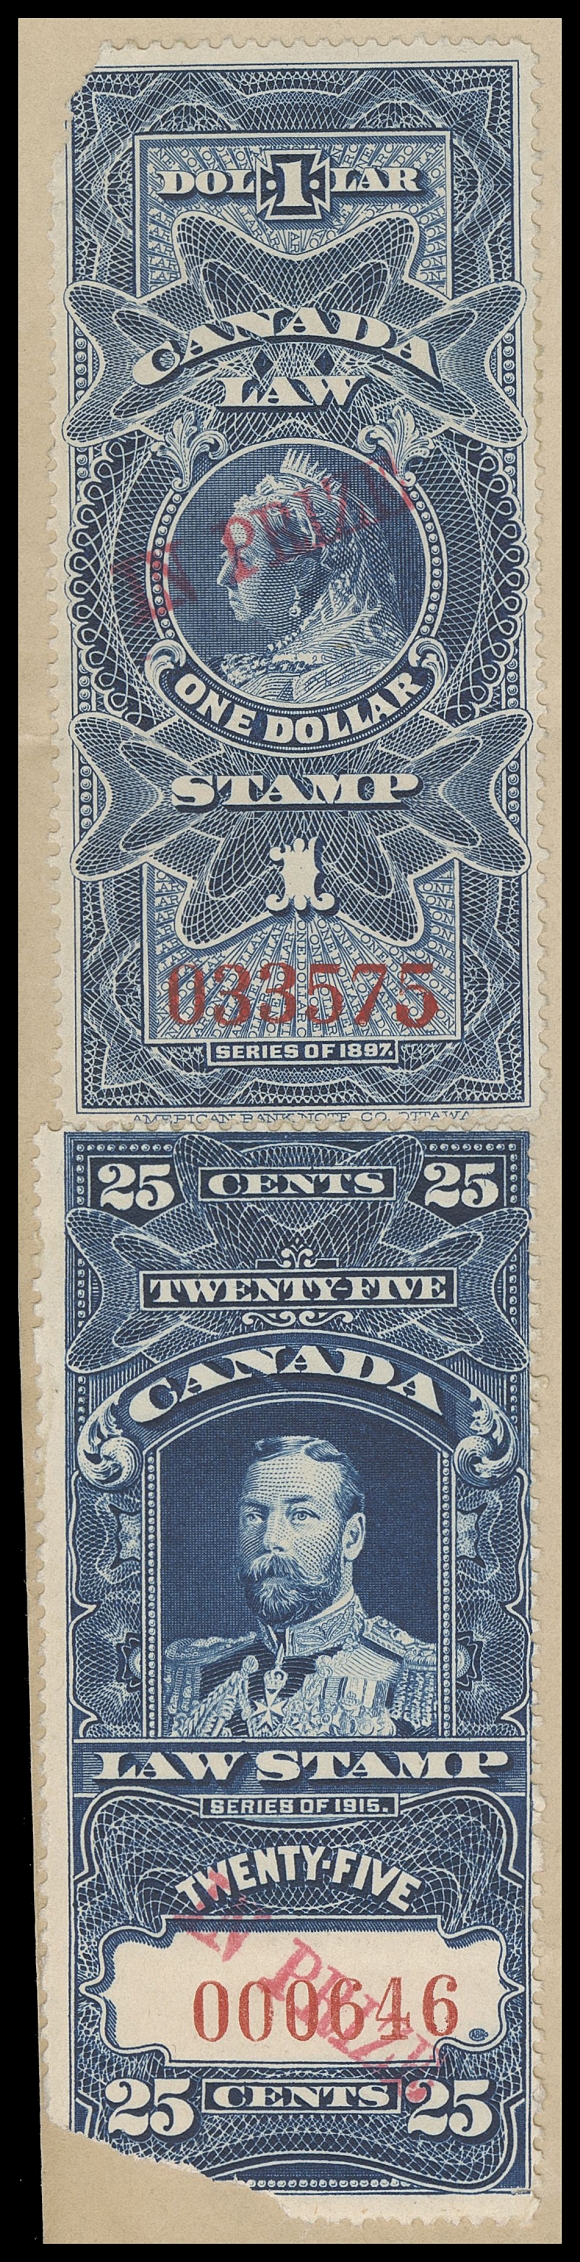 CANADA REVENUES (FEDERAL)  FSC30, 31,Two singles handstamped "IN PRIZE" in red, serial numbers "033575" and "000646", both with corner flaw, affixed uncancelled to first page of "The Leonor" two-page Consent document, handstamped Exchequer Court IN PRIZE with manuscript "10th July 1917", signed Edmund Leslie Newcombe, Deputy Minister of Justice Canada, Fine (Cat. value for stamps $2,200)